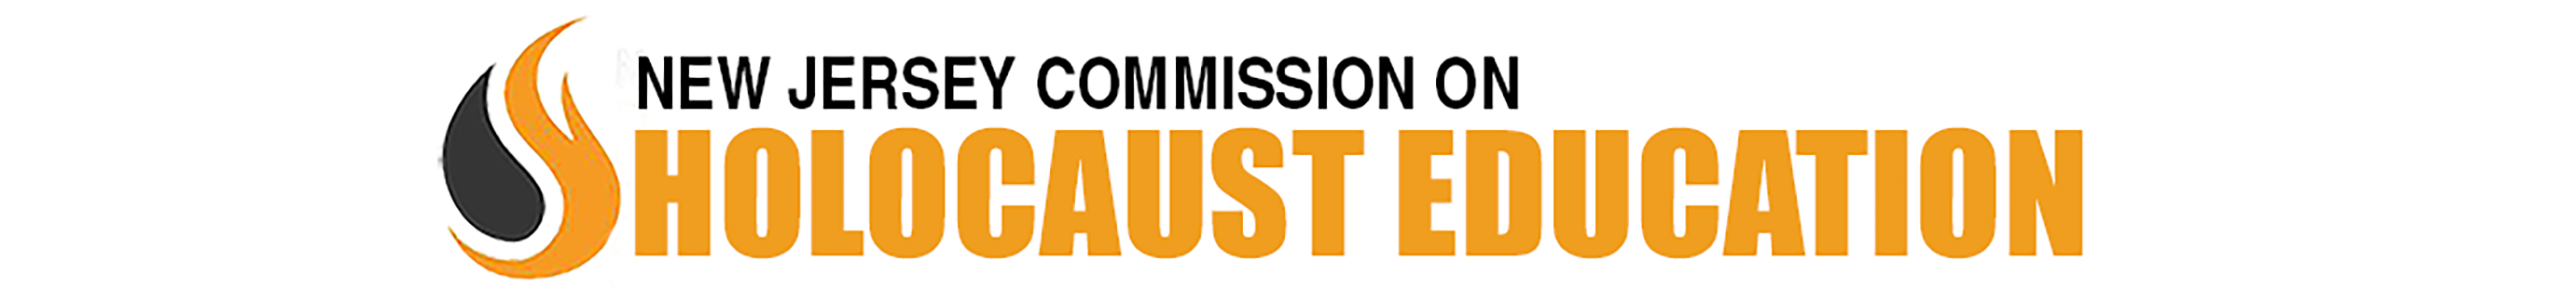 New Jersey Commission on Holocaust Education